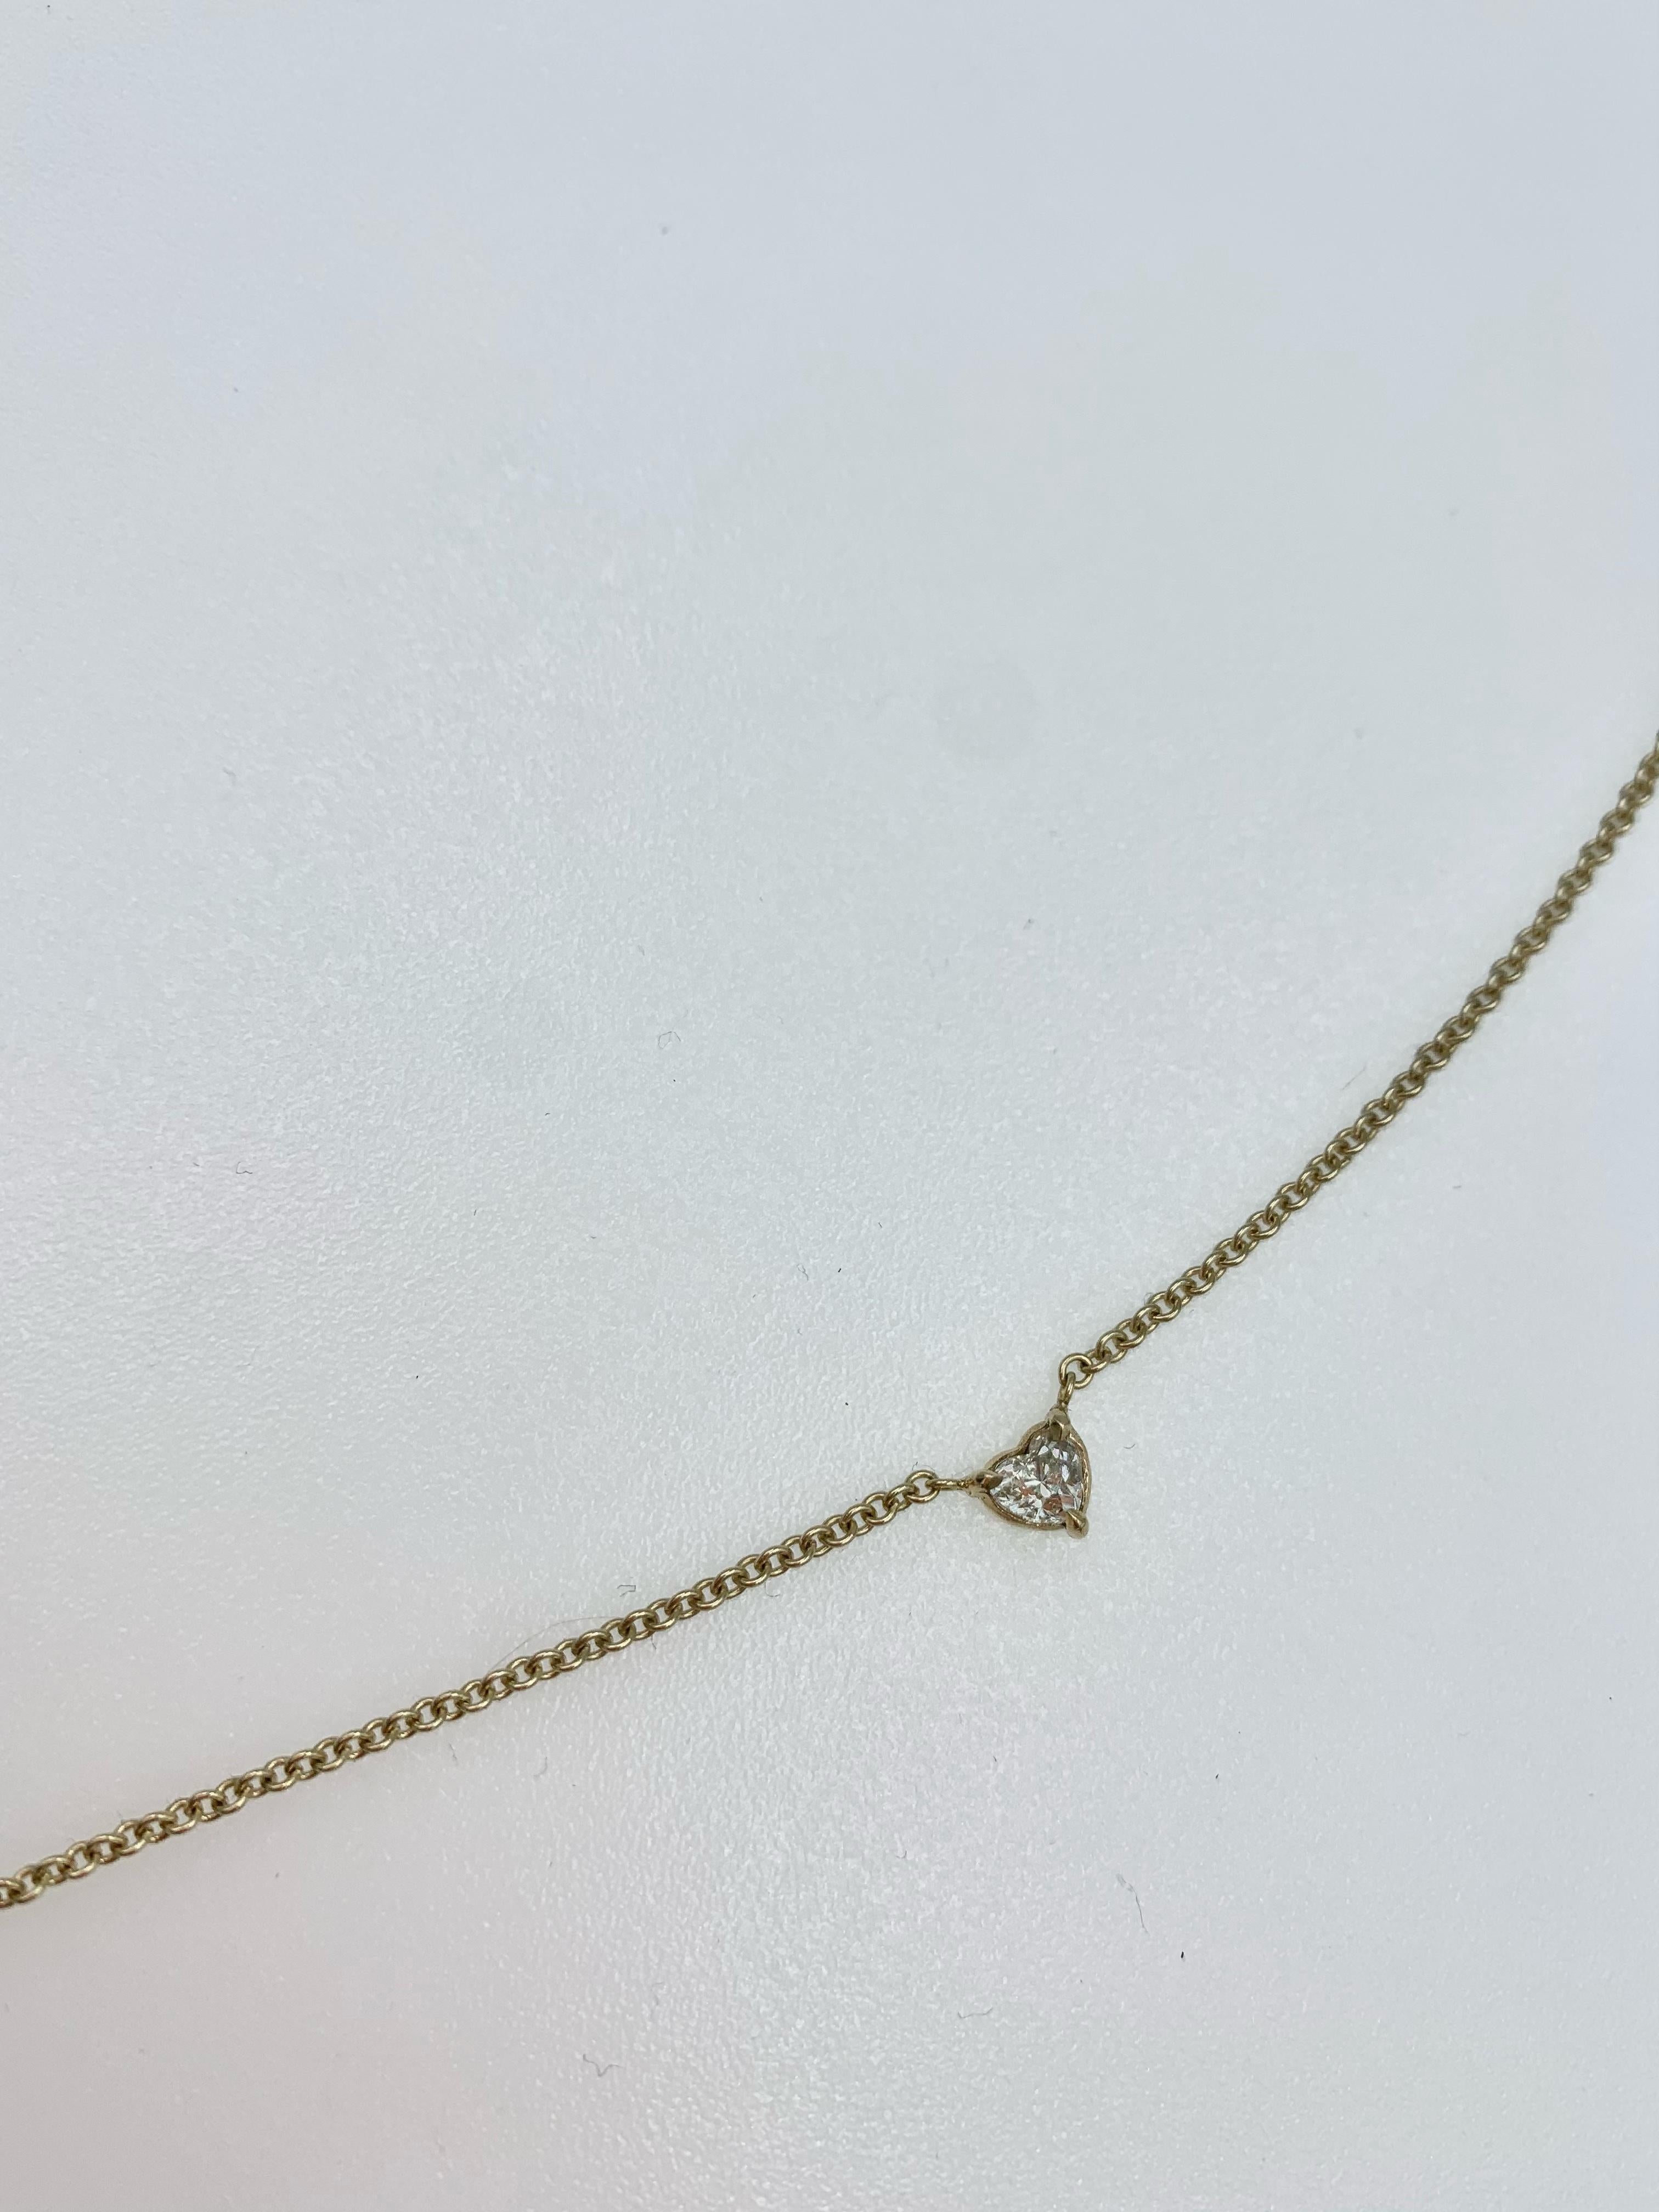 Hand made in 9 karat yellow gold with a heart shaped Emerald in the middle and two heart shaped Diamonds to each side, each Diamond weighs in at .2 carats. This necklace is perfect for everyday but also as an understated accessory to any event. It